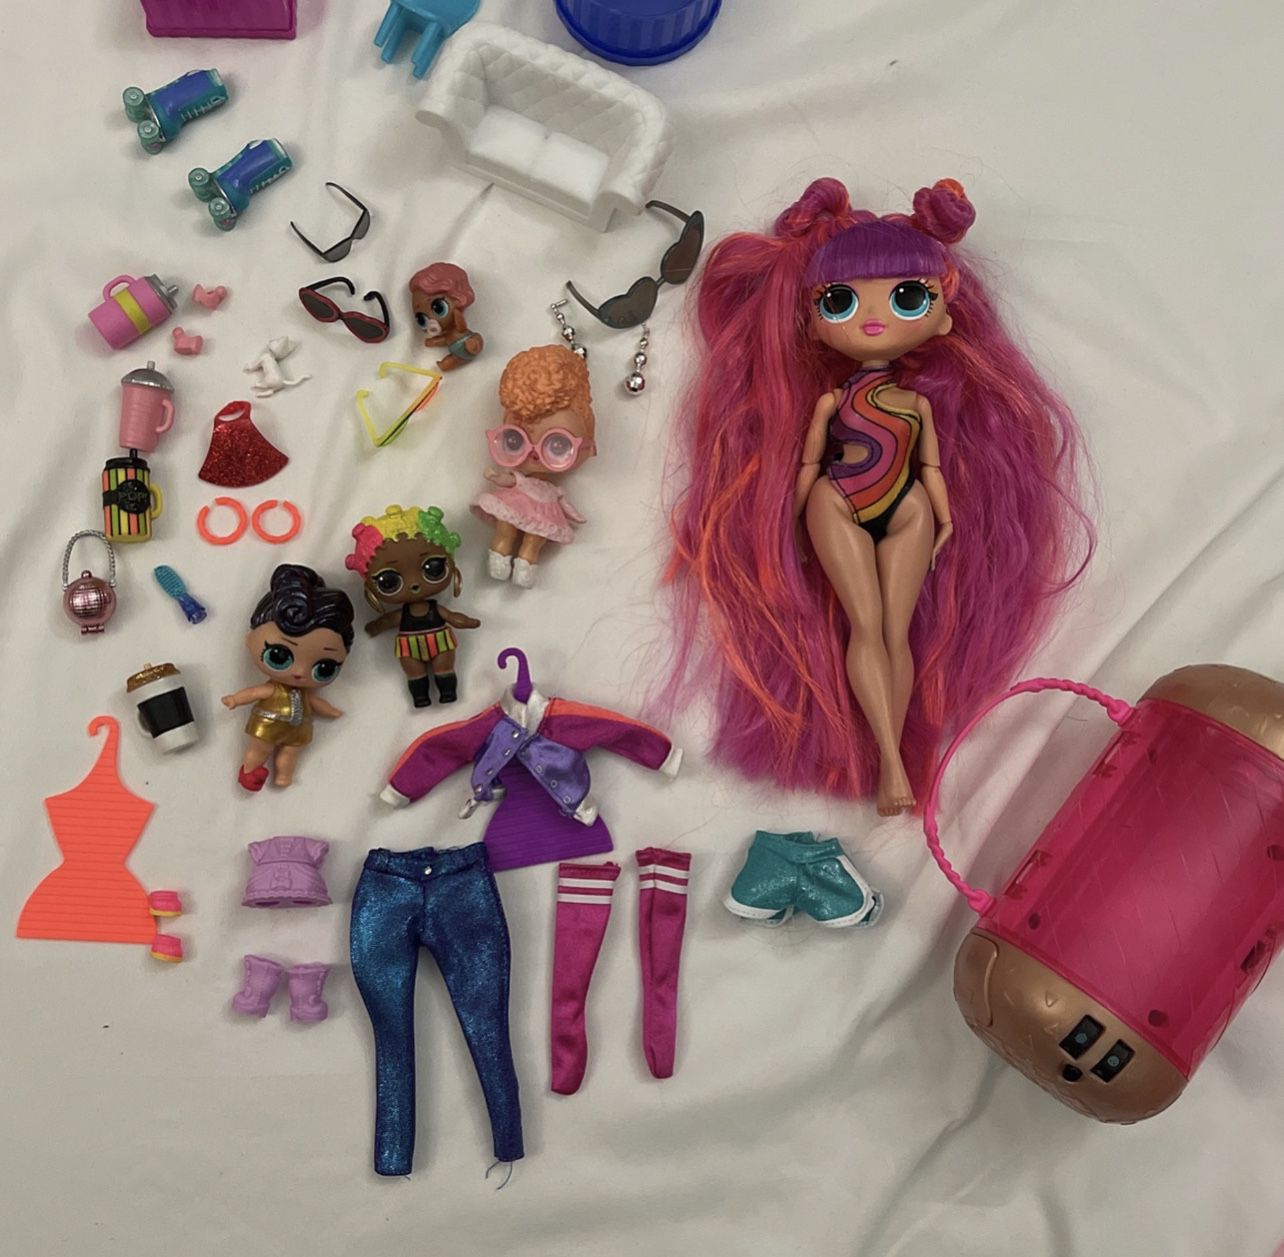 LOL Surprise Doll And Accessories Bigger Surprise  Pink LOL SURPRISE! 